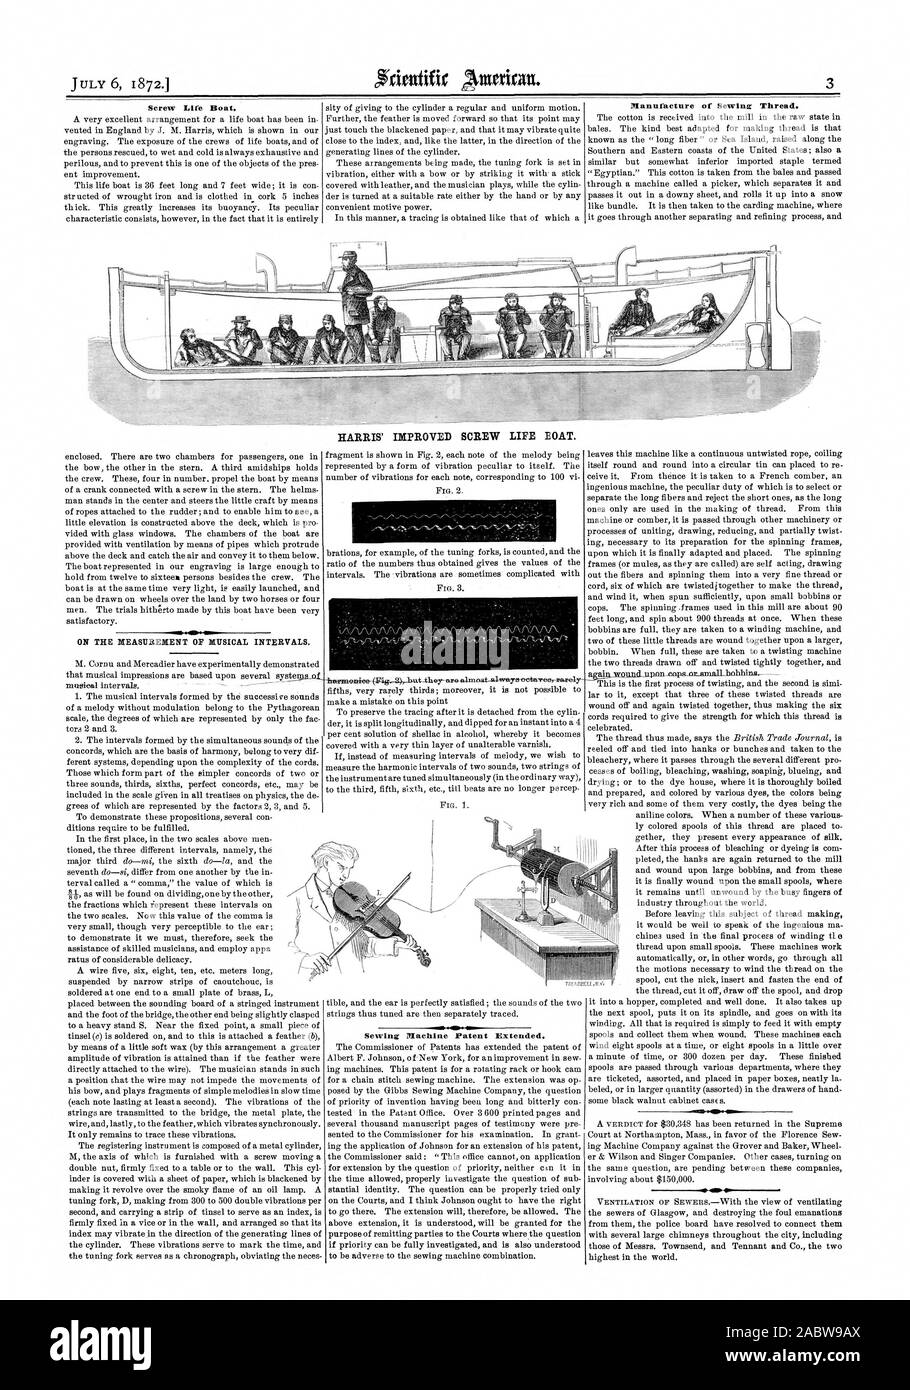 Screw Life Boat. Manufacture of Sewing Thread. ON THE MEASUREMENT OF MUSICAL INTERVALS. HARRIS' IMPROVED SCREW LIFE BOAT. Sewing Machine Patent Extended., scientific american, 1872-07-06 Stock Photo